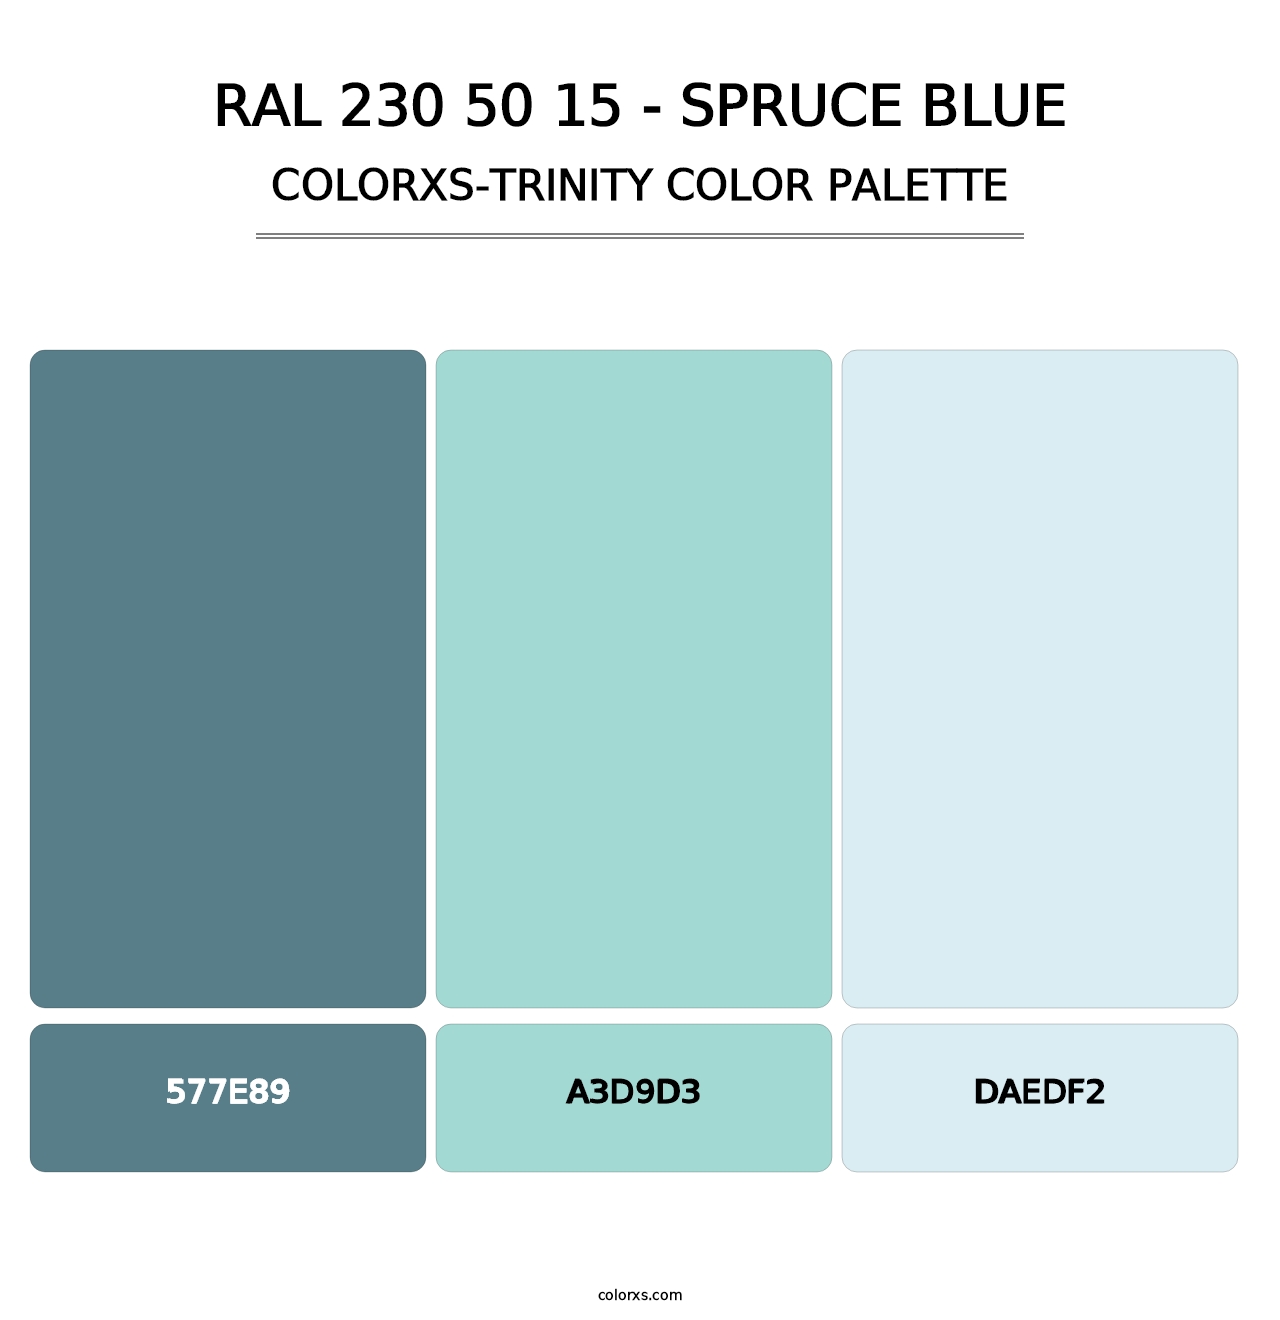 RAL 230 50 15 - Spruce Blue - Colorxs Trinity Palette